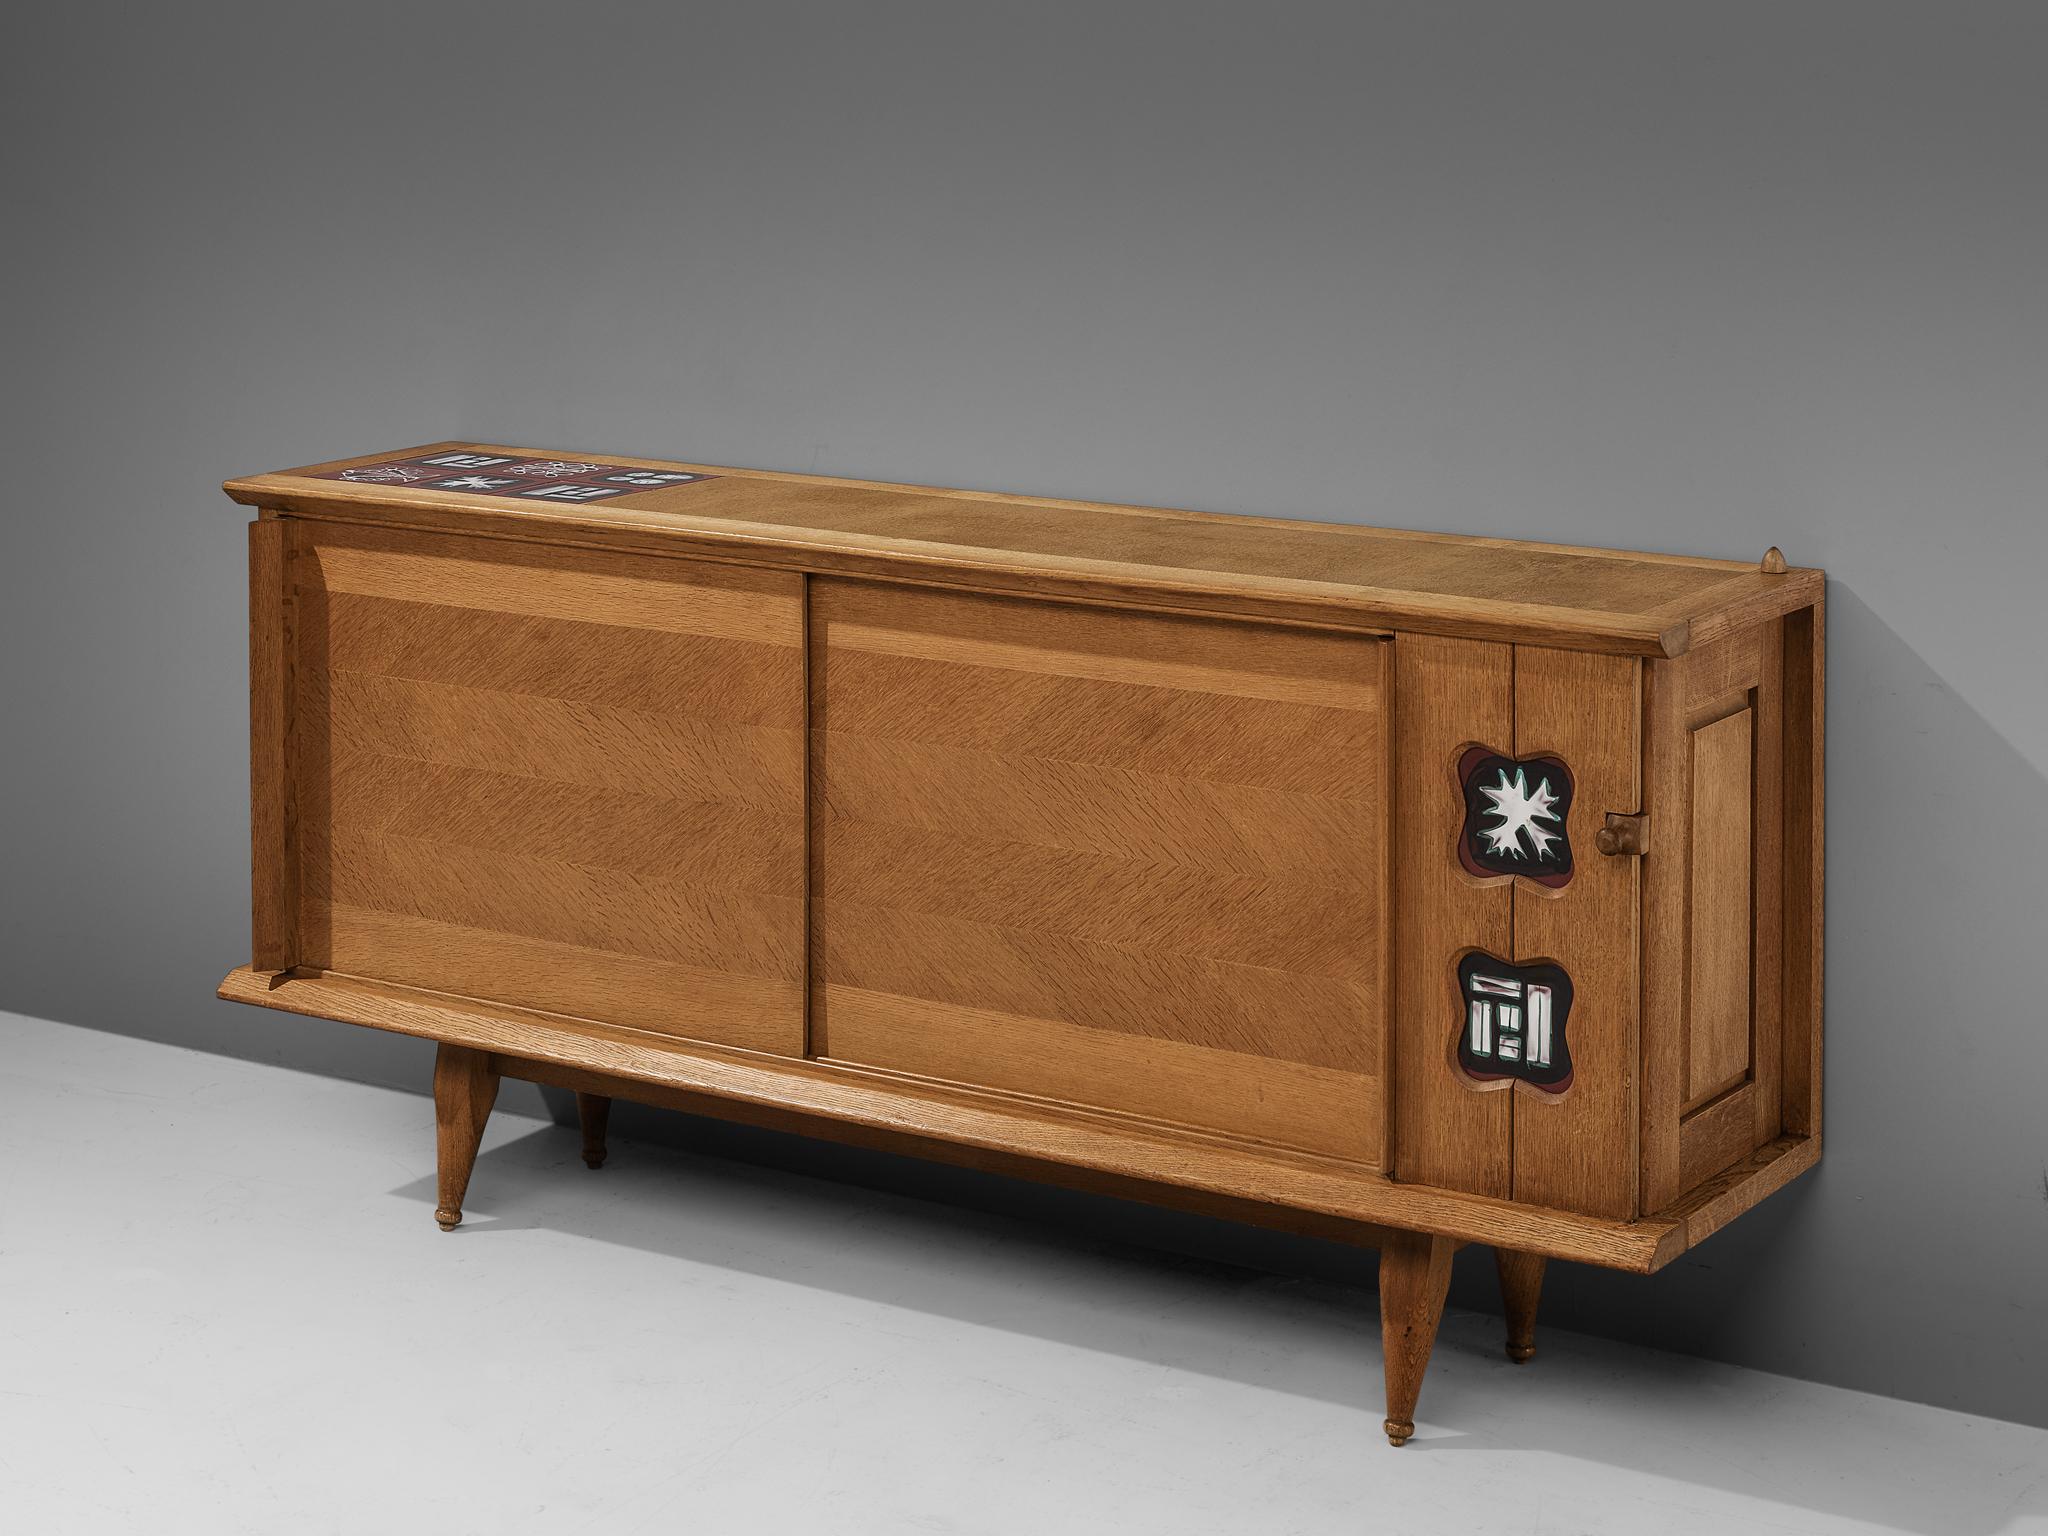 Guillerme et Chambron Sideboard in Oak with Ceramic Tiles 1